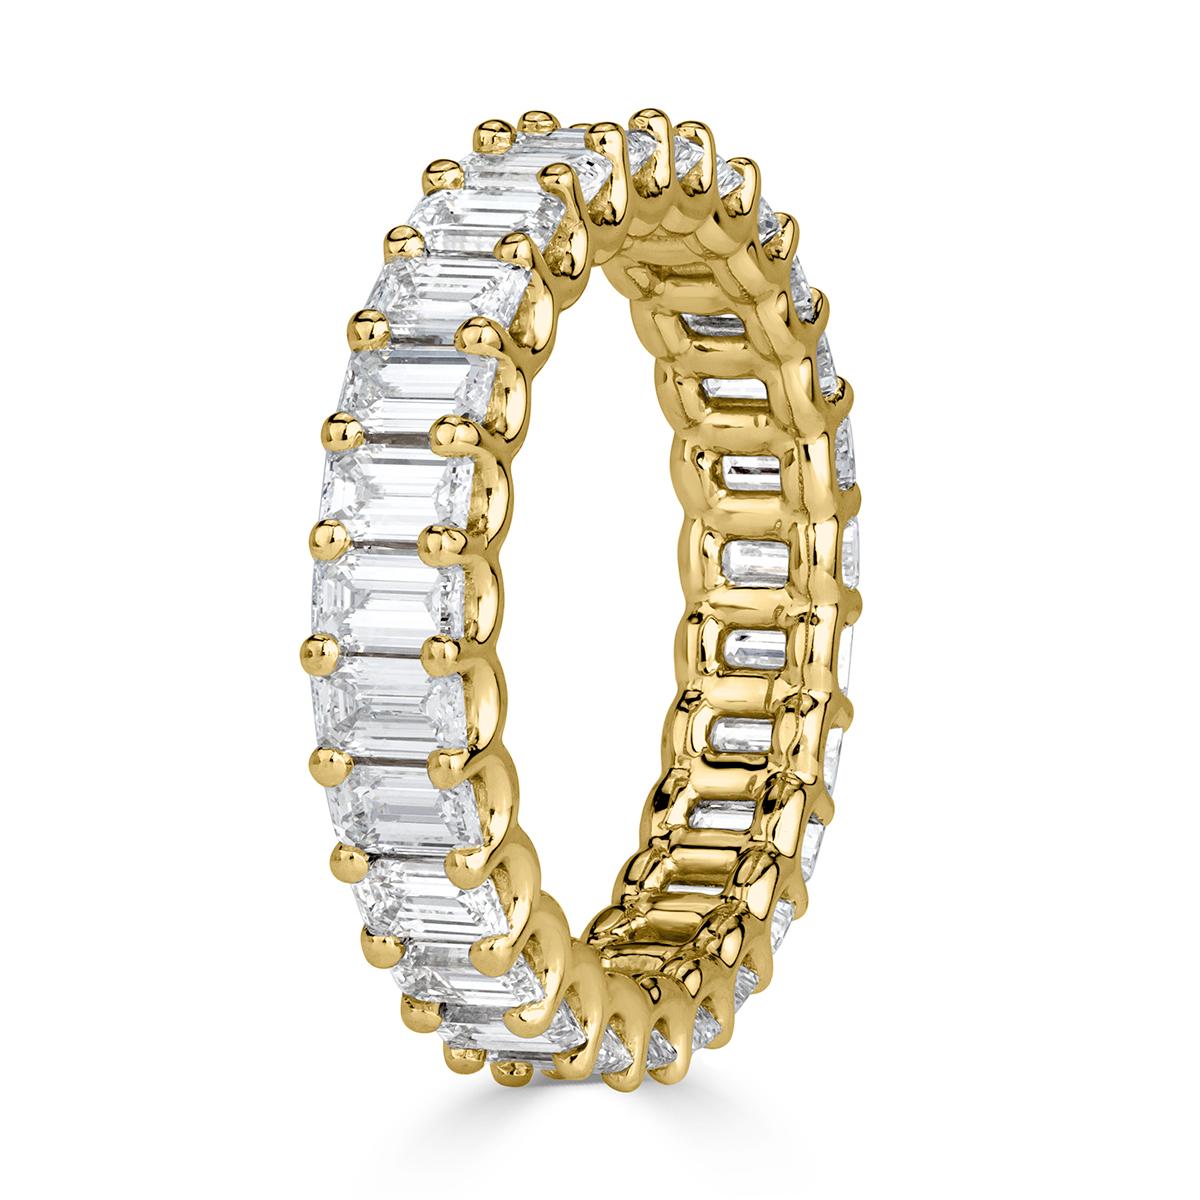 This stunning diamond eternity band features 3.15ct of emerald cut diamonds graded at E-F in color, VVS2-VS1 in clarity. They are set in a custom, 18k yellow gold 